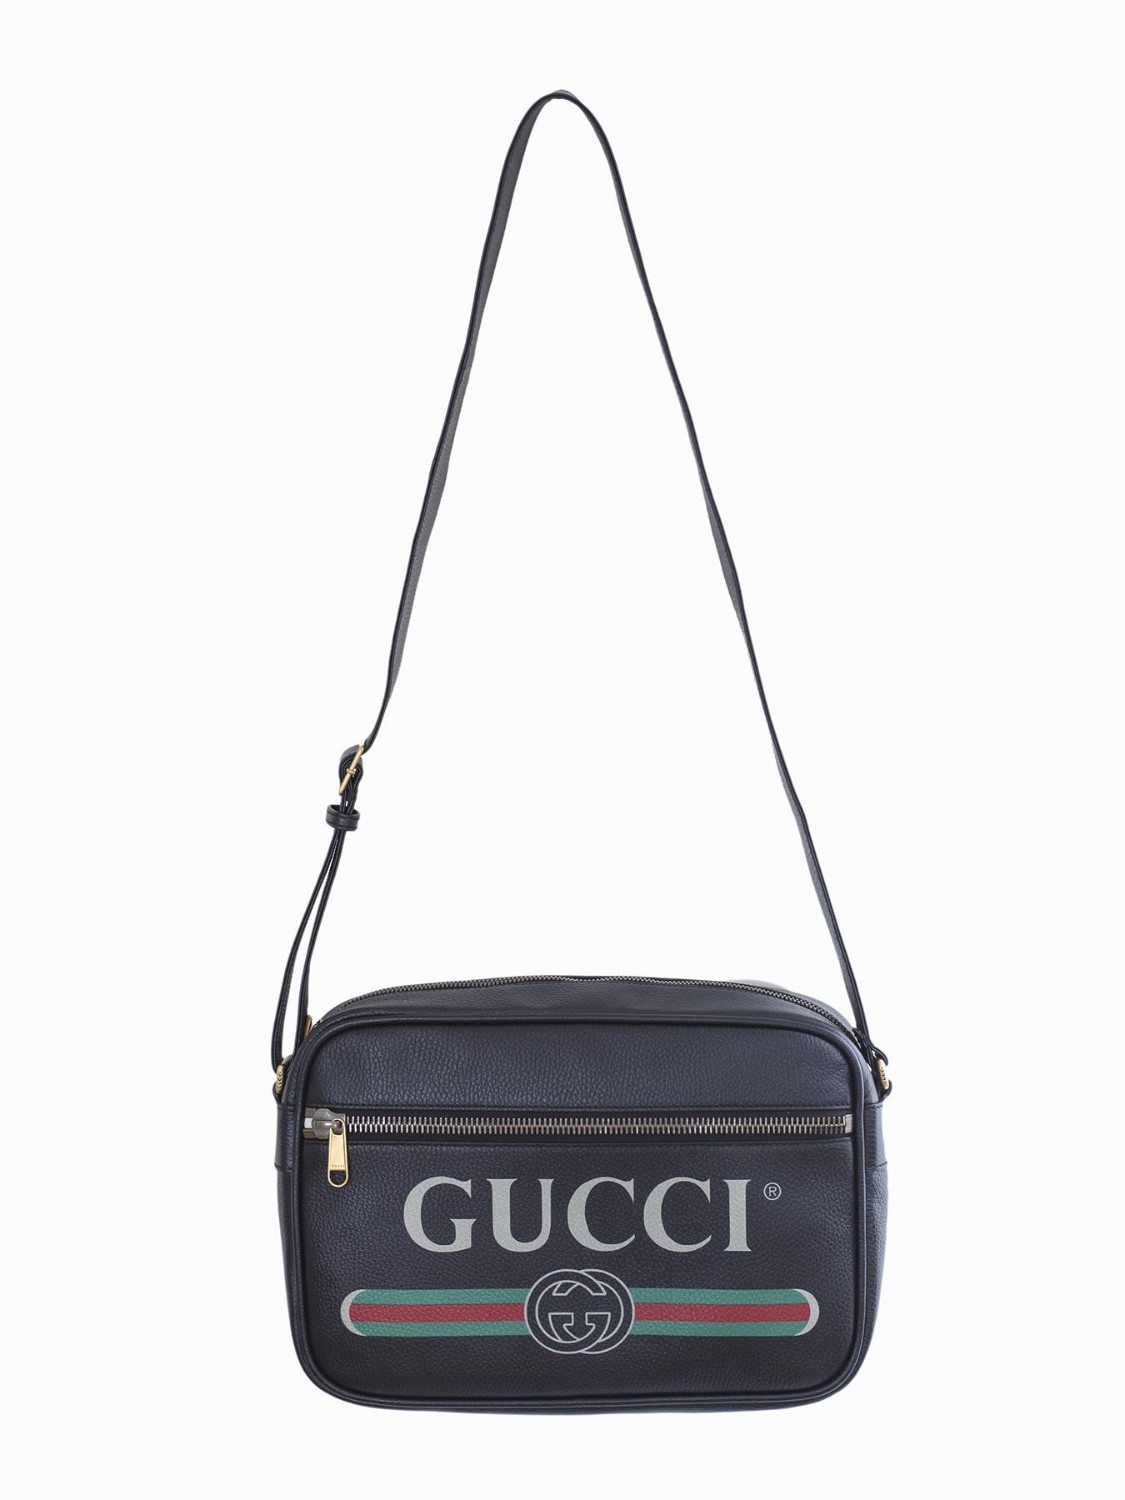 shop GUCCI Saldi Borsa: Gucci Black leather with Gucci vintage logo crossbody bag.
Brass hardware.
Front zipper pocket.
Interior zipper pocket and two smartphone pockets.
Adjustable leather strap with 19.5" drop.
Top zipper closure.
Dimensions: Length 33.5 cm, Height 23.5 cm, Depth 9.5 cm.
Cotton and linen lining.
Made in Italy.. 523589 0QRAT-8163 number 8209680